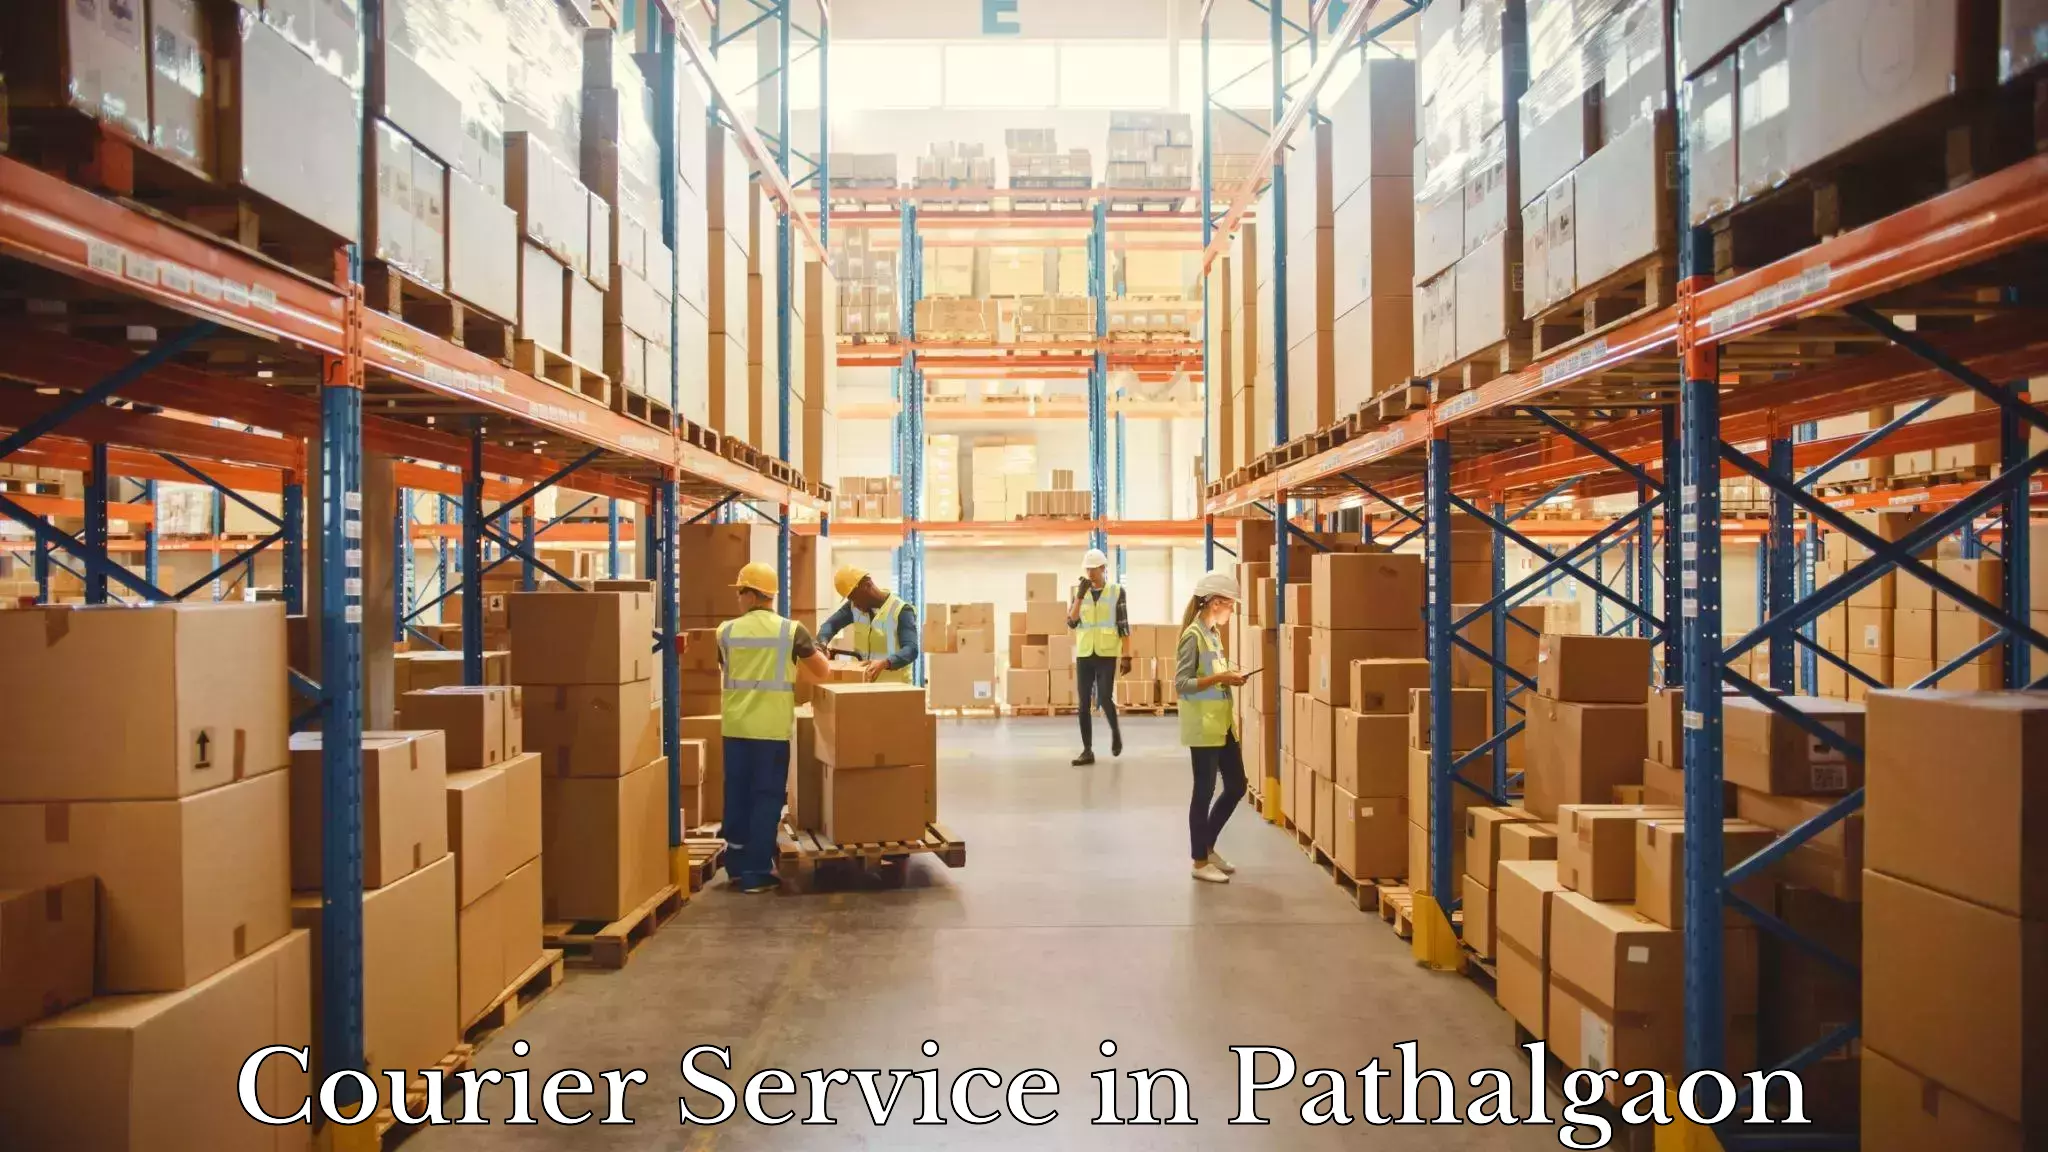 Supply chain efficiency in Pathalgaon